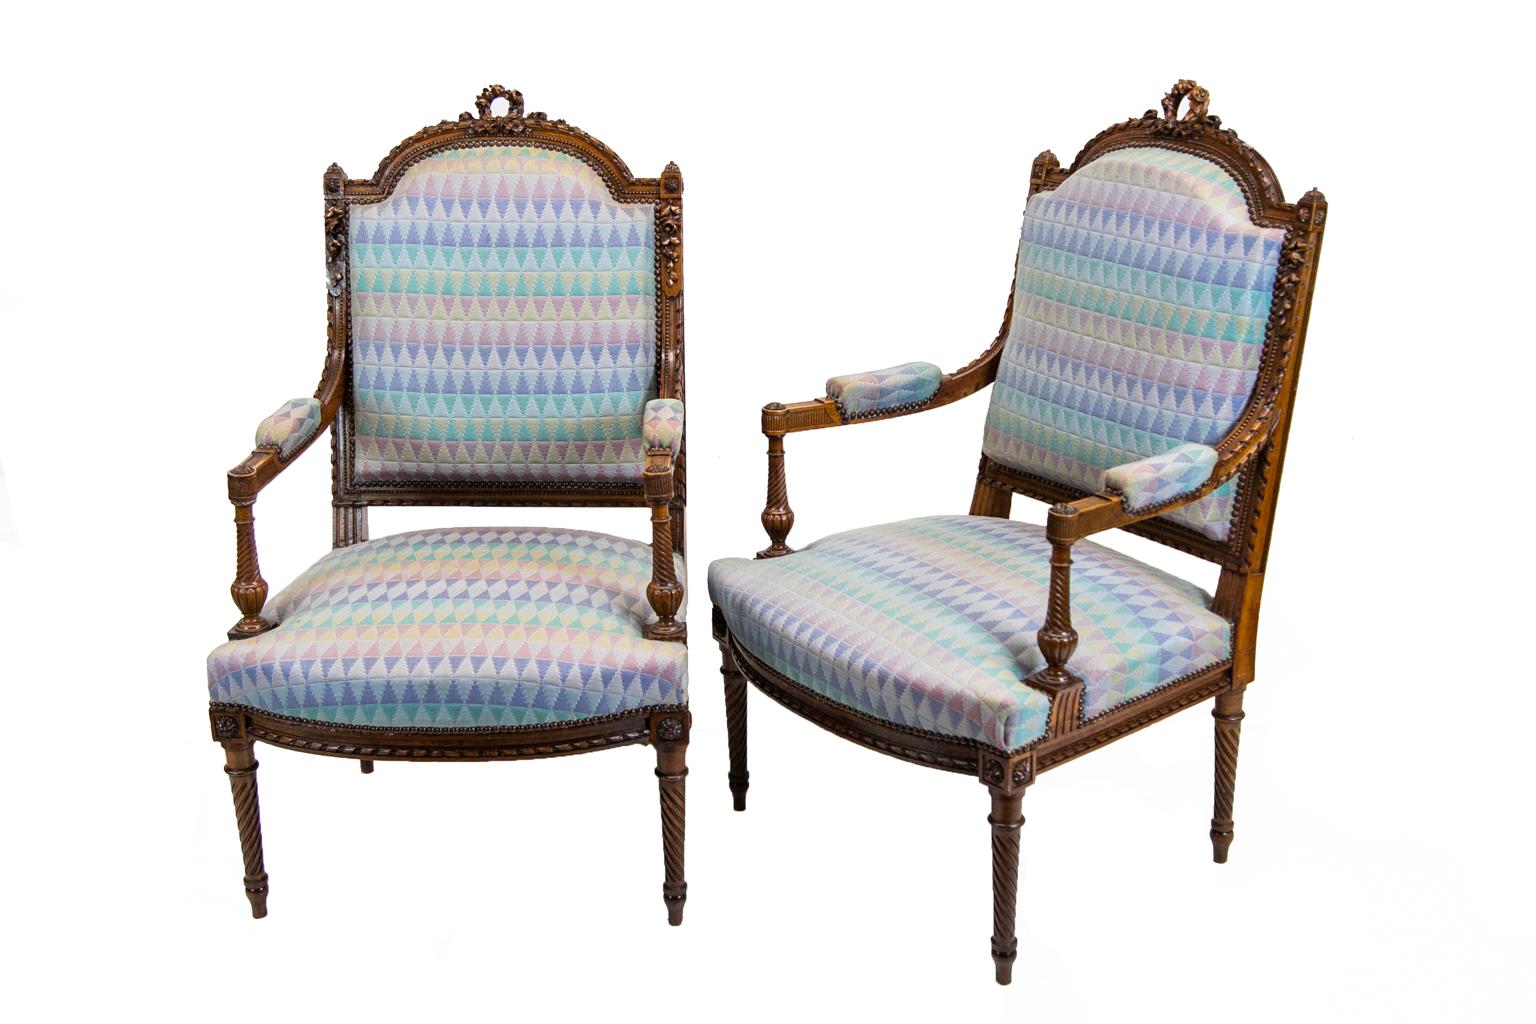 Pair of French carved walnut bergère armchairs have upholstery framed with brass stud work all around. The arms are carved with beadwork, a spiral ribbon, and leaf and flower designs carved in high relief. They also have carved ribbing and a carved